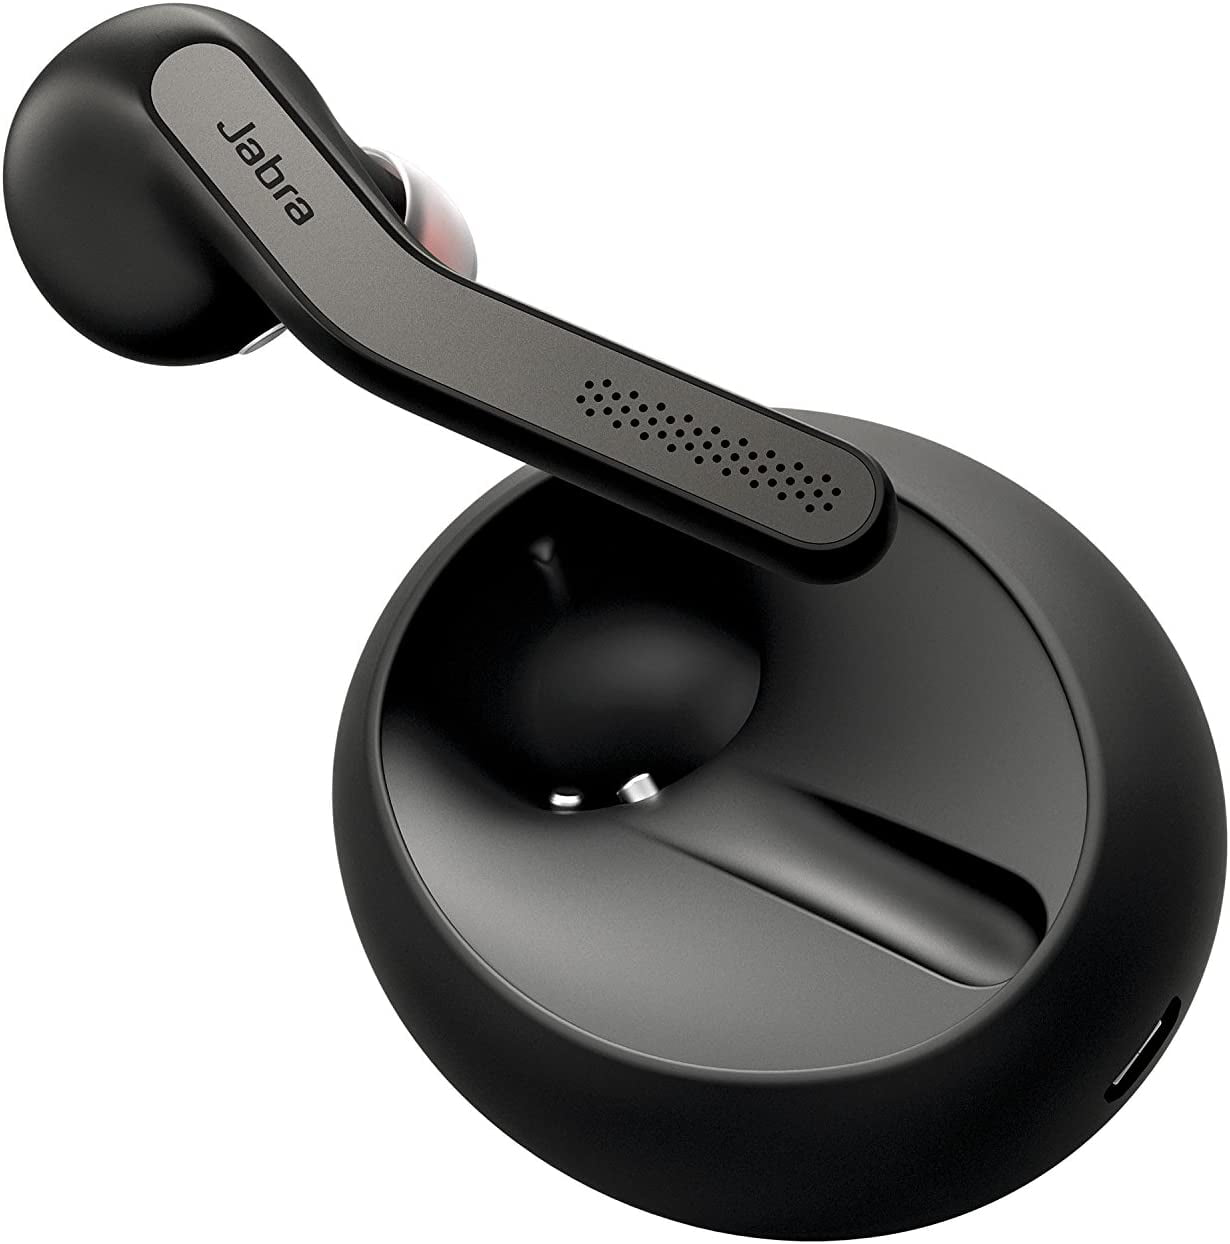 Jabra Talk 55 Bluetooth Headset for High Definition Hands-Free Calls with Dual Mic Noise Cancellation, Touch Controls and Portable Carrying Case - Walmart.com